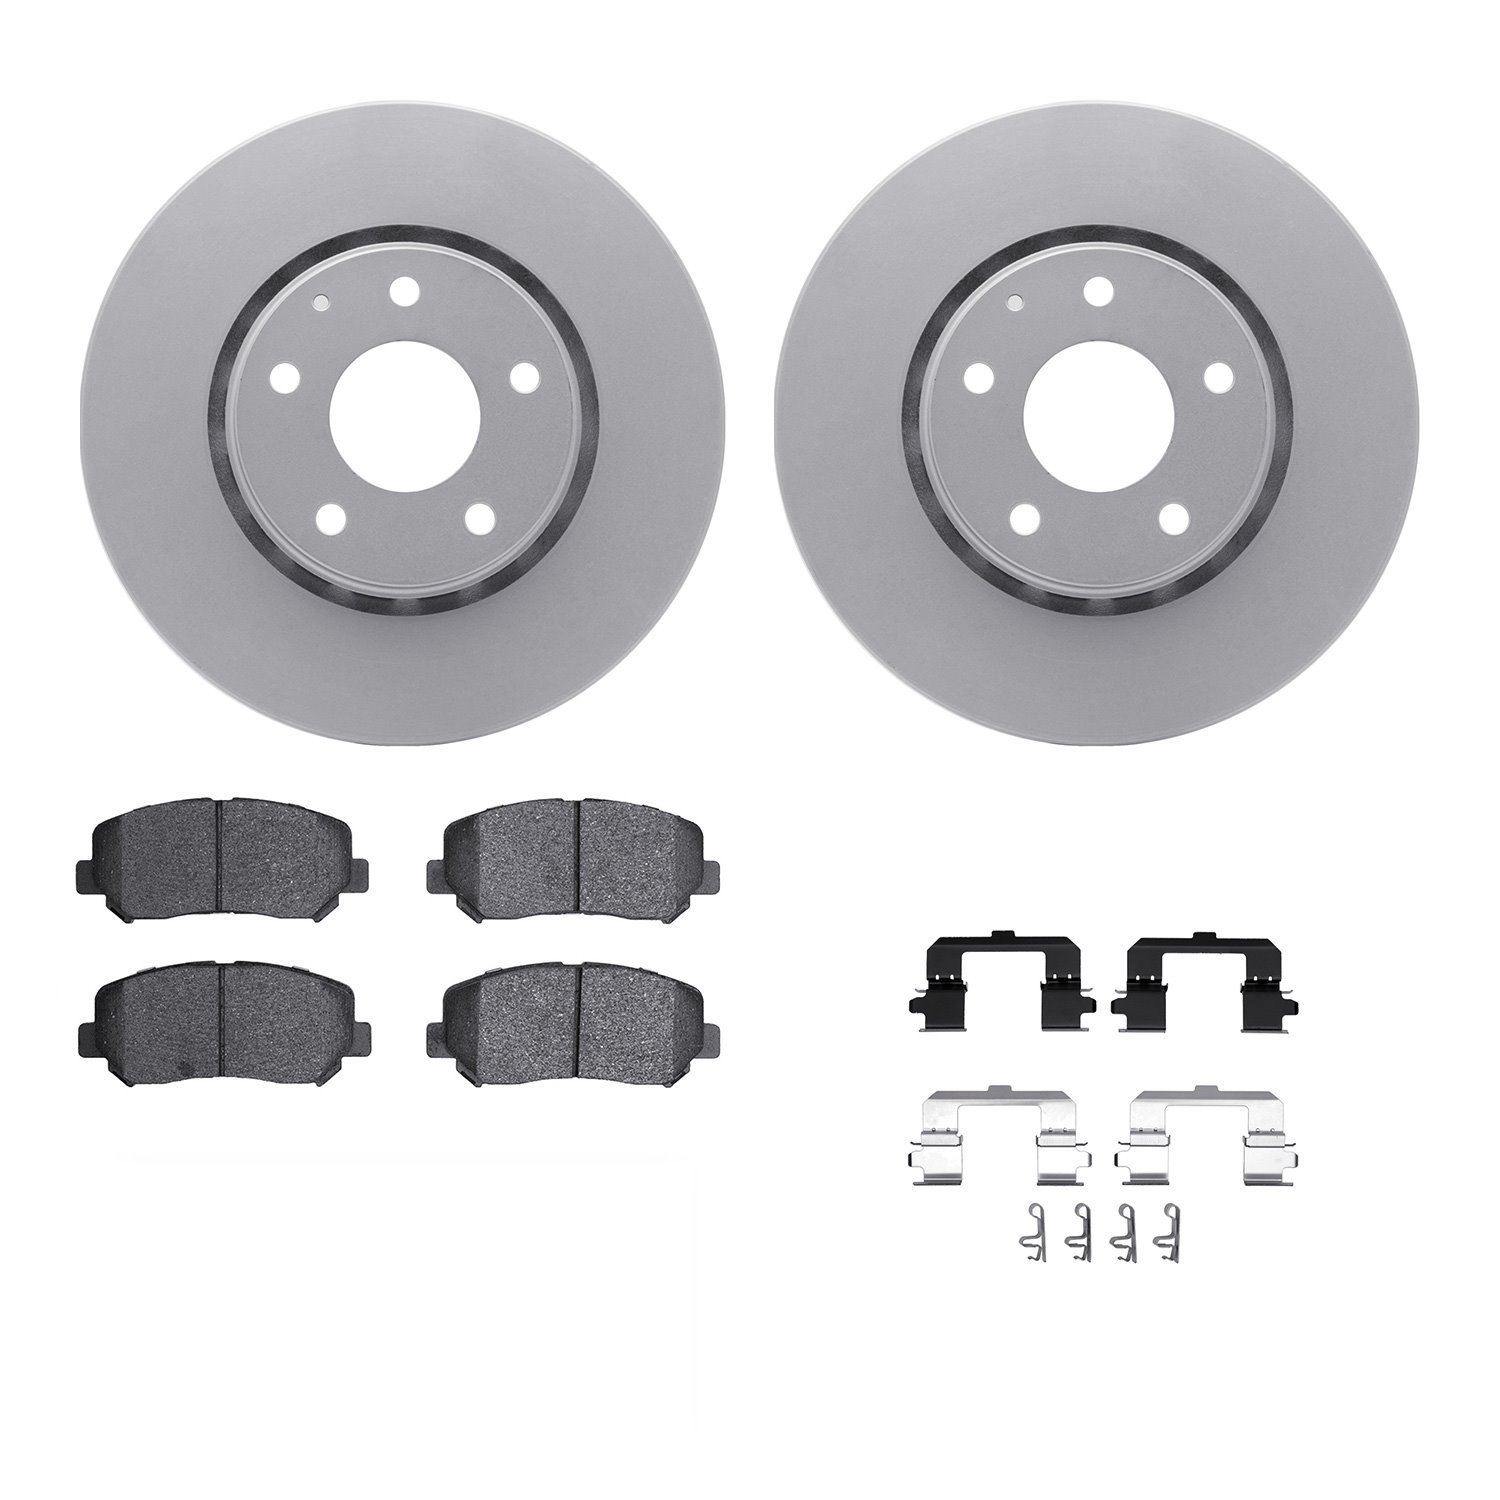 4312-80033 Geospec Brake Rotors with 3000-Series Ceramic Brake Pads & Hardware, Fits Select Ford/Lincoln/Mercury/Mazda, Position